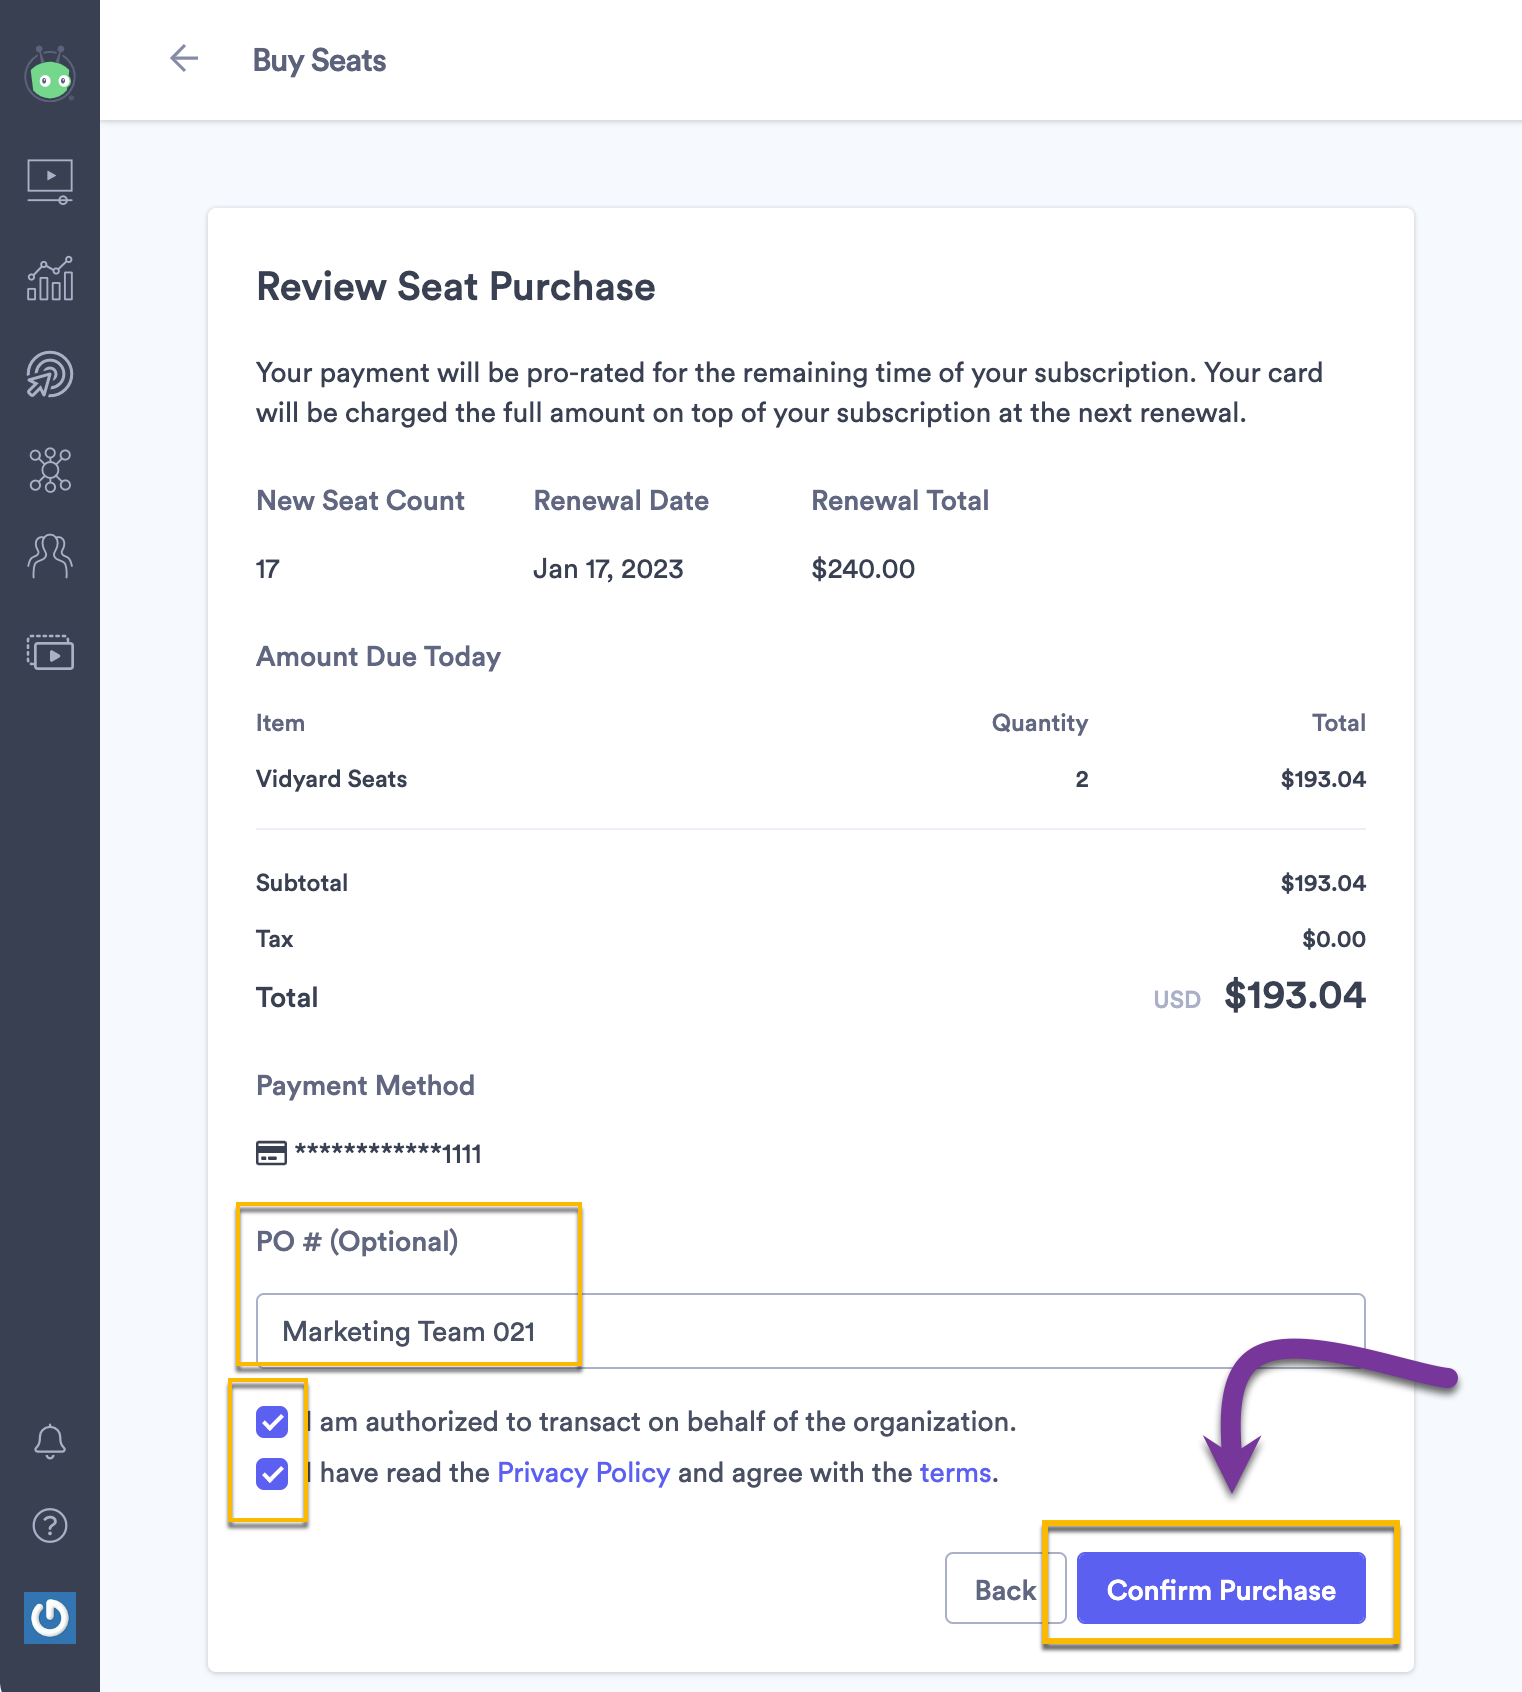 Purchase breakdown that shows user total owed before confirming purchase